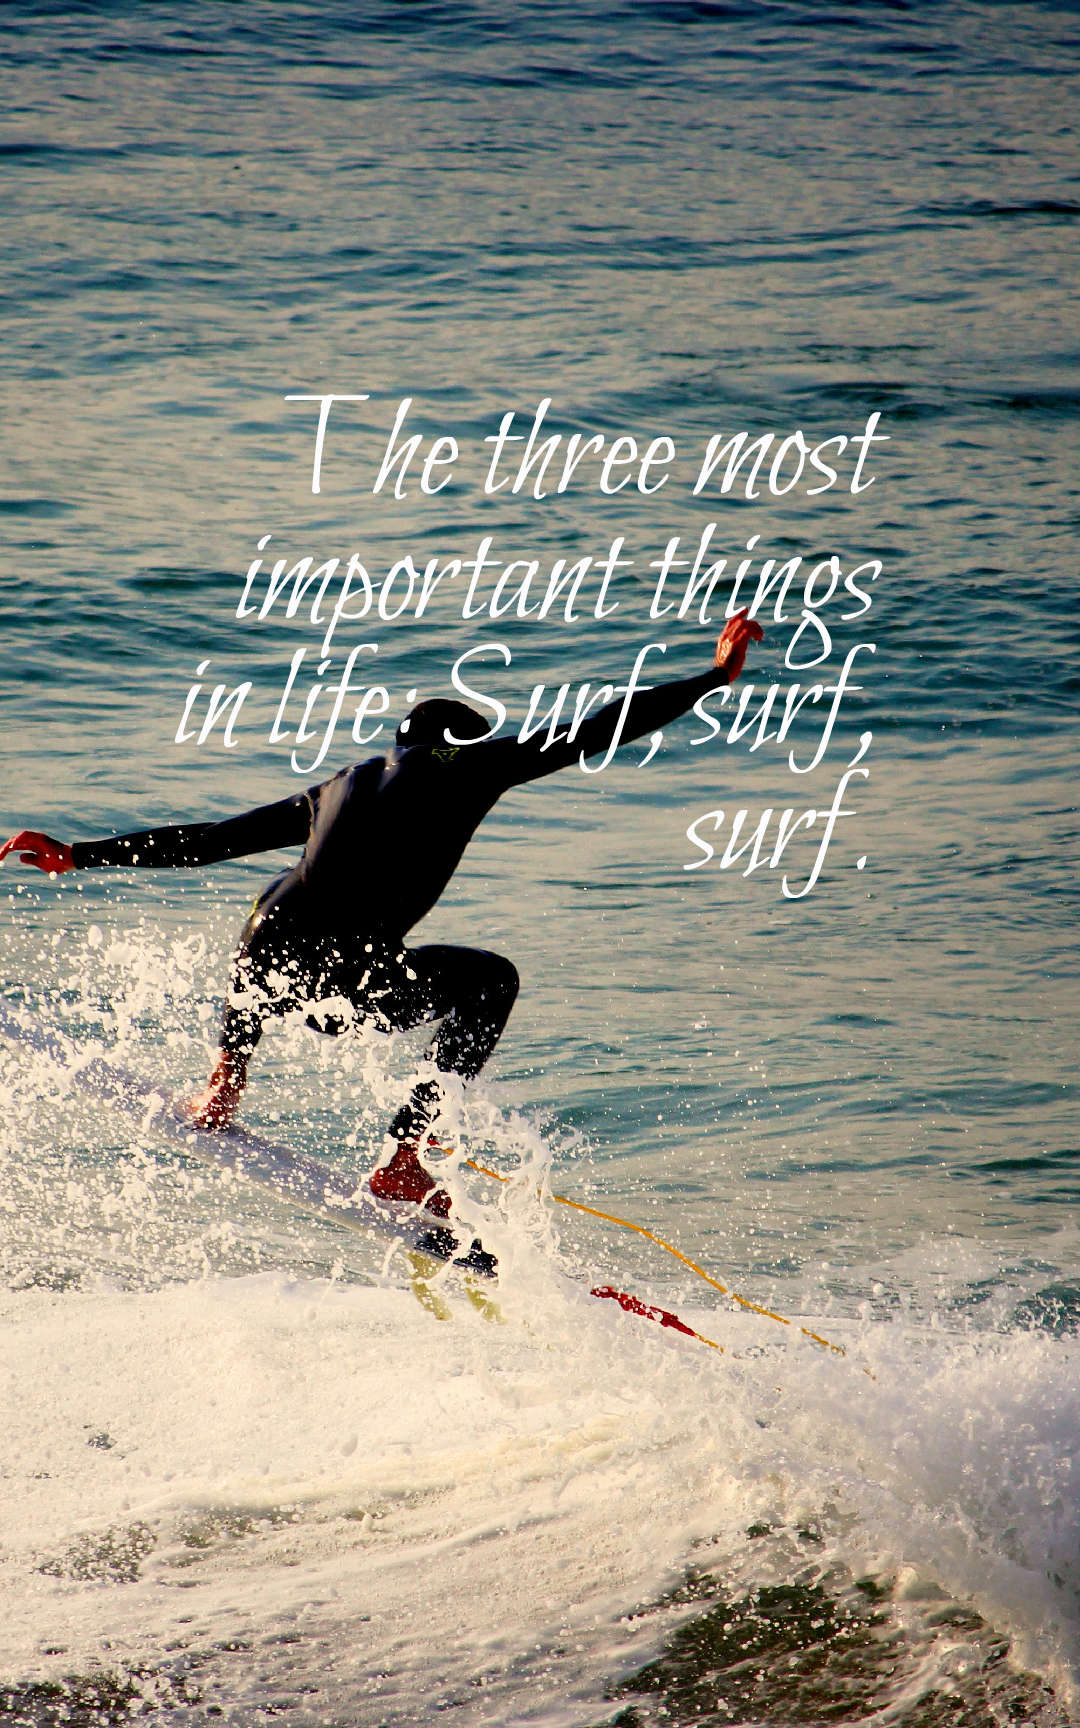 The three most important things in life Surf, surf, surf.